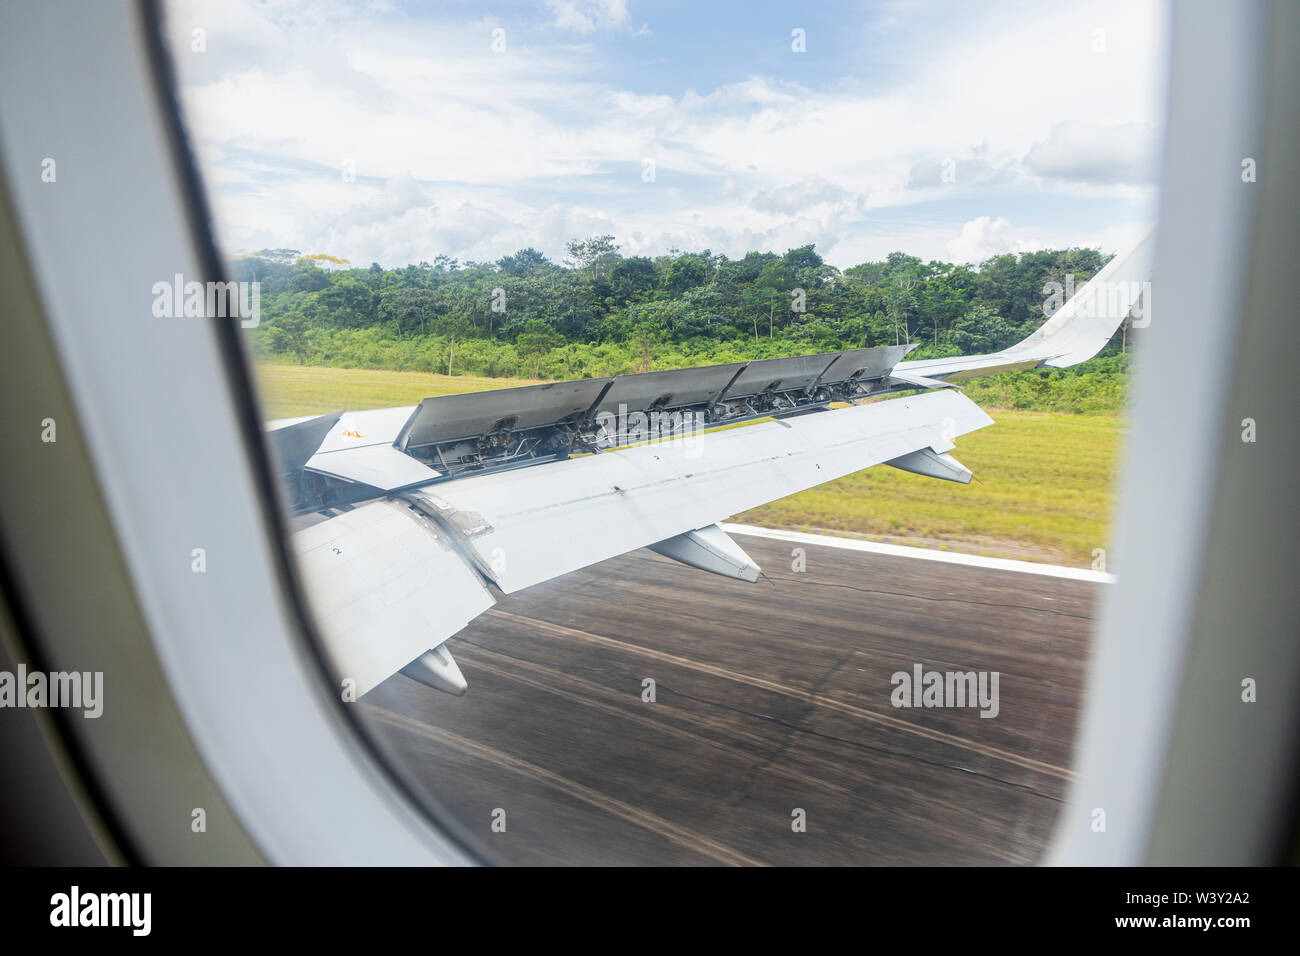 Passenger view of the flaps up for braking as a Airbus A320 lands on the runway at Puerto Maldonado airport in Peru, South America Stock Photo